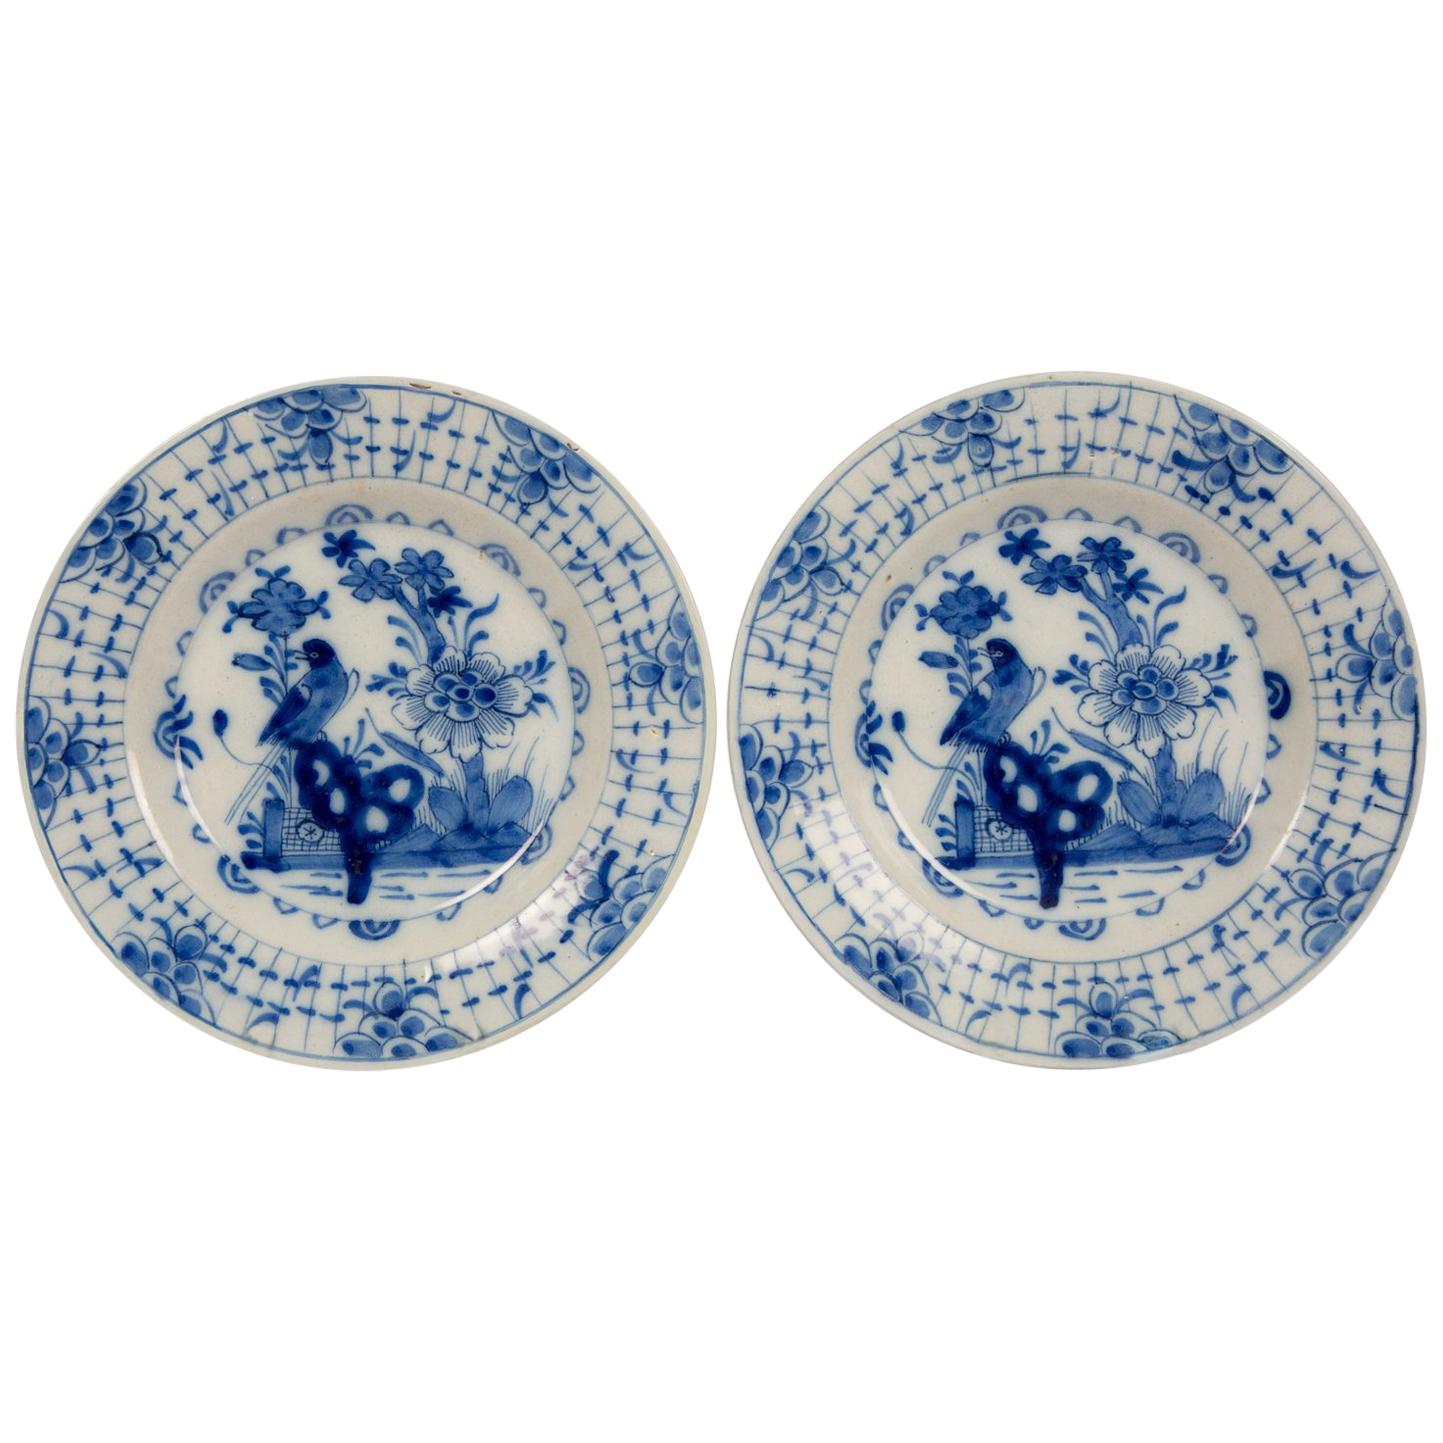 Pair of Antique Blue and White Dutch Delft Dishes Early 19th century Circa 1820 For Sale